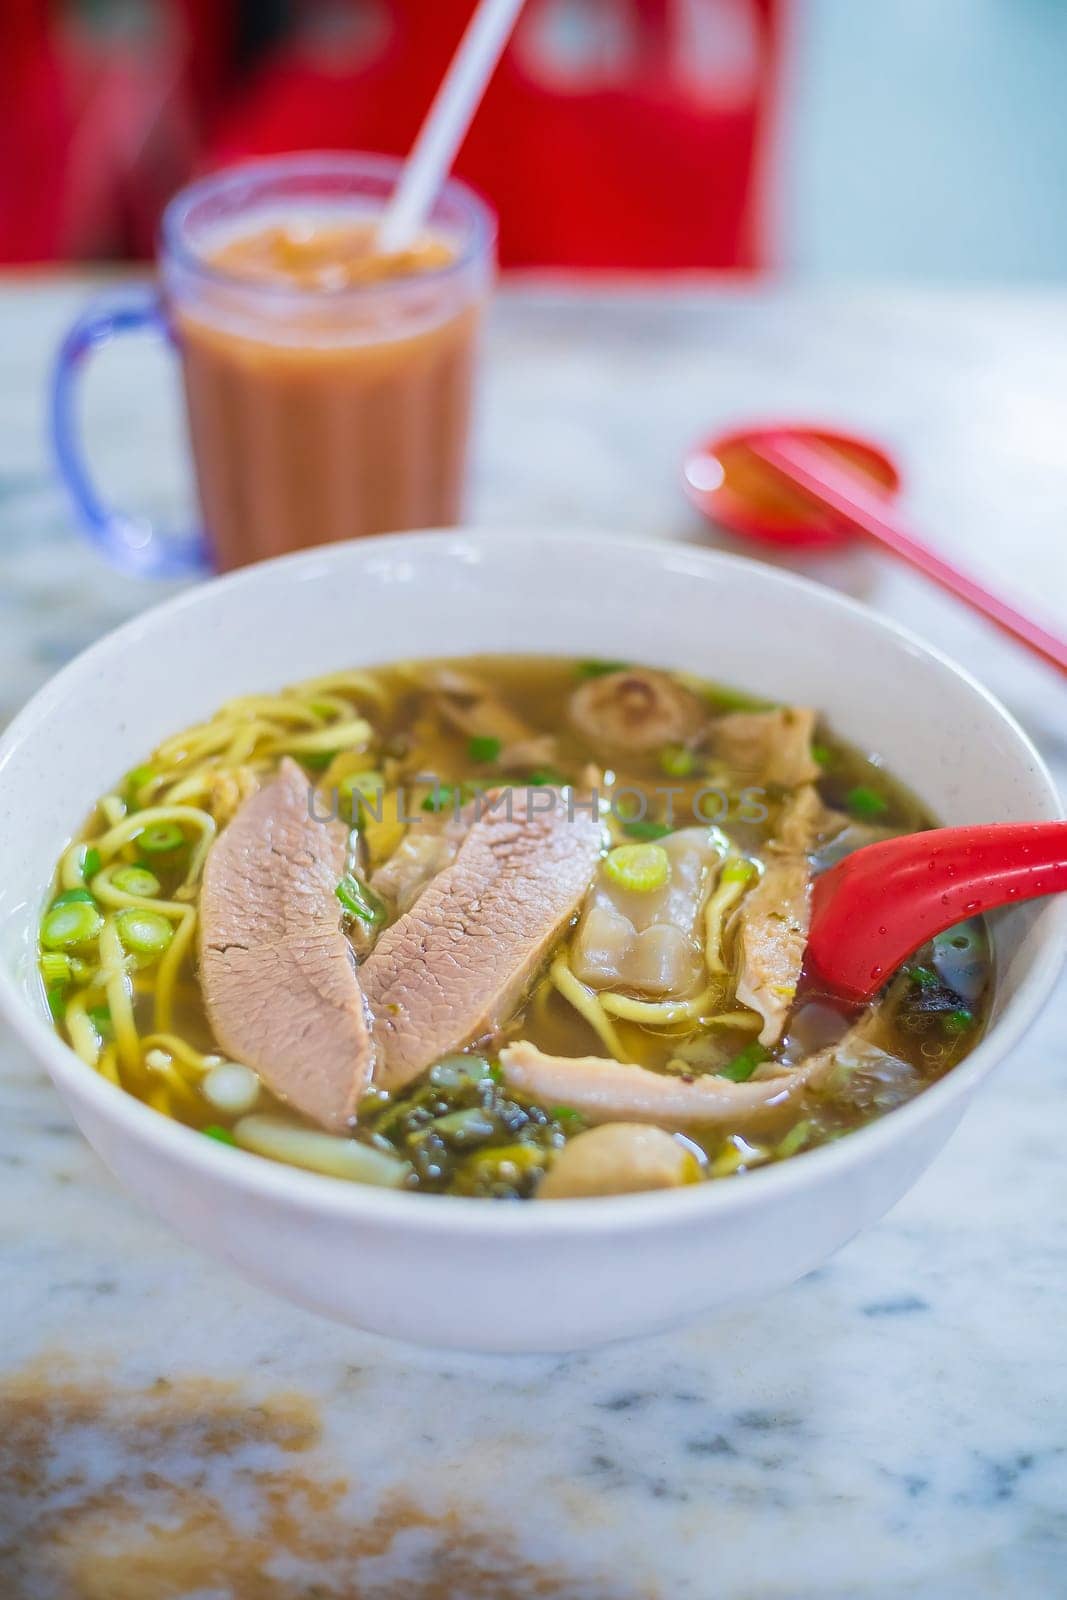 Malaysia famous food, beef noodle by f11photo